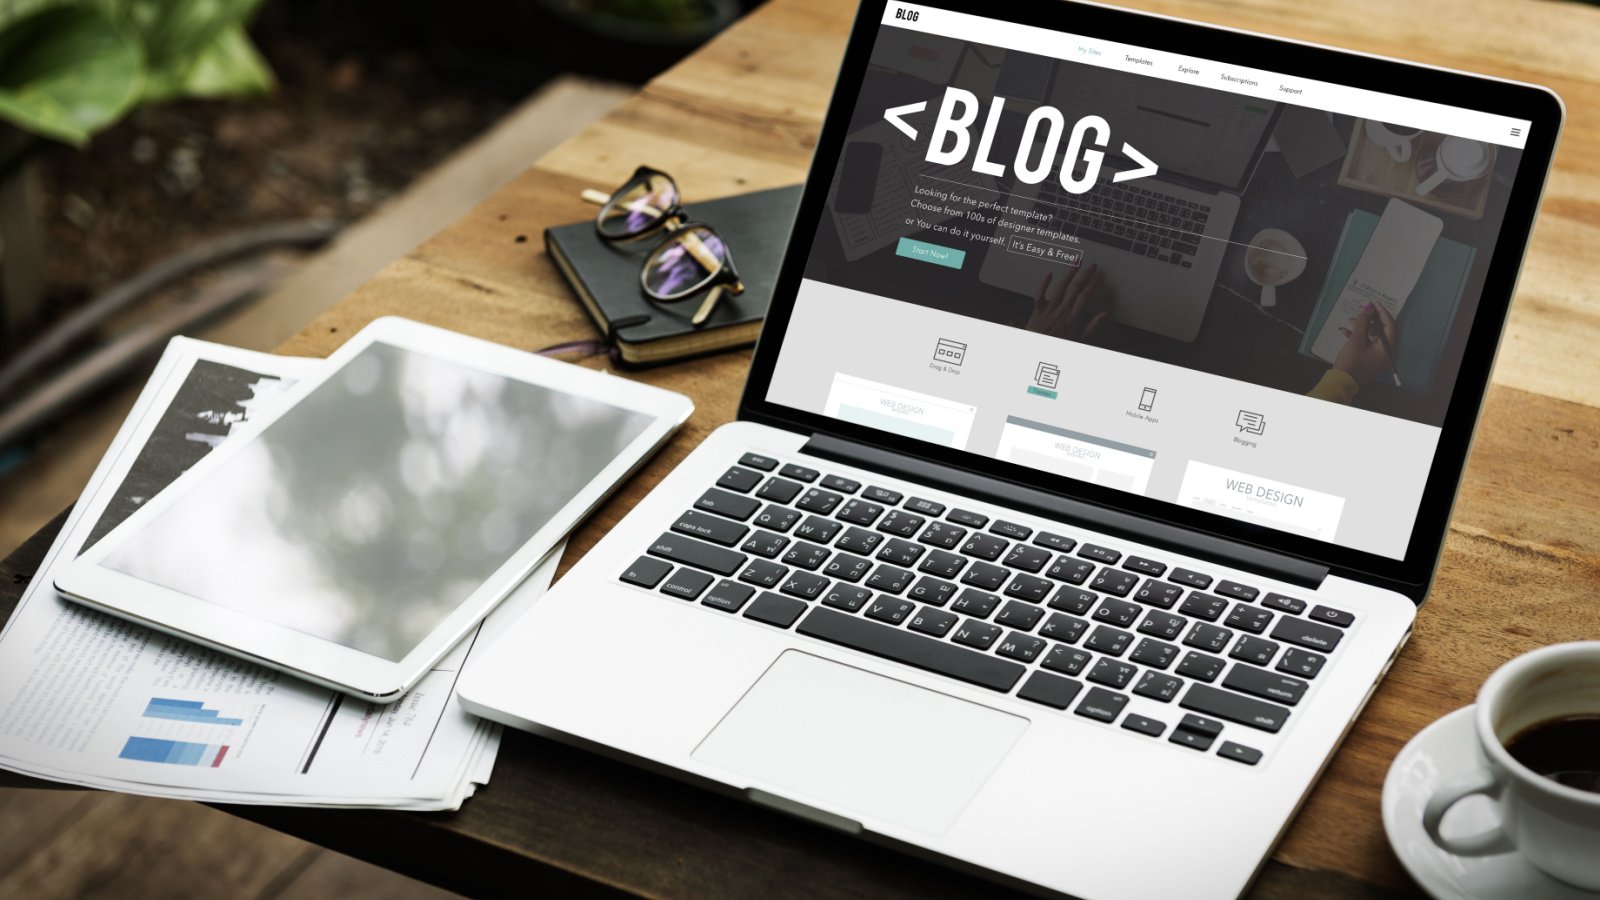 <p>For those who prefer more creative freedom, why not start a blog? Share your passions and insights with the world. With commitment and the right strategy, your blog can become a source of income through various monetization methods.</p>